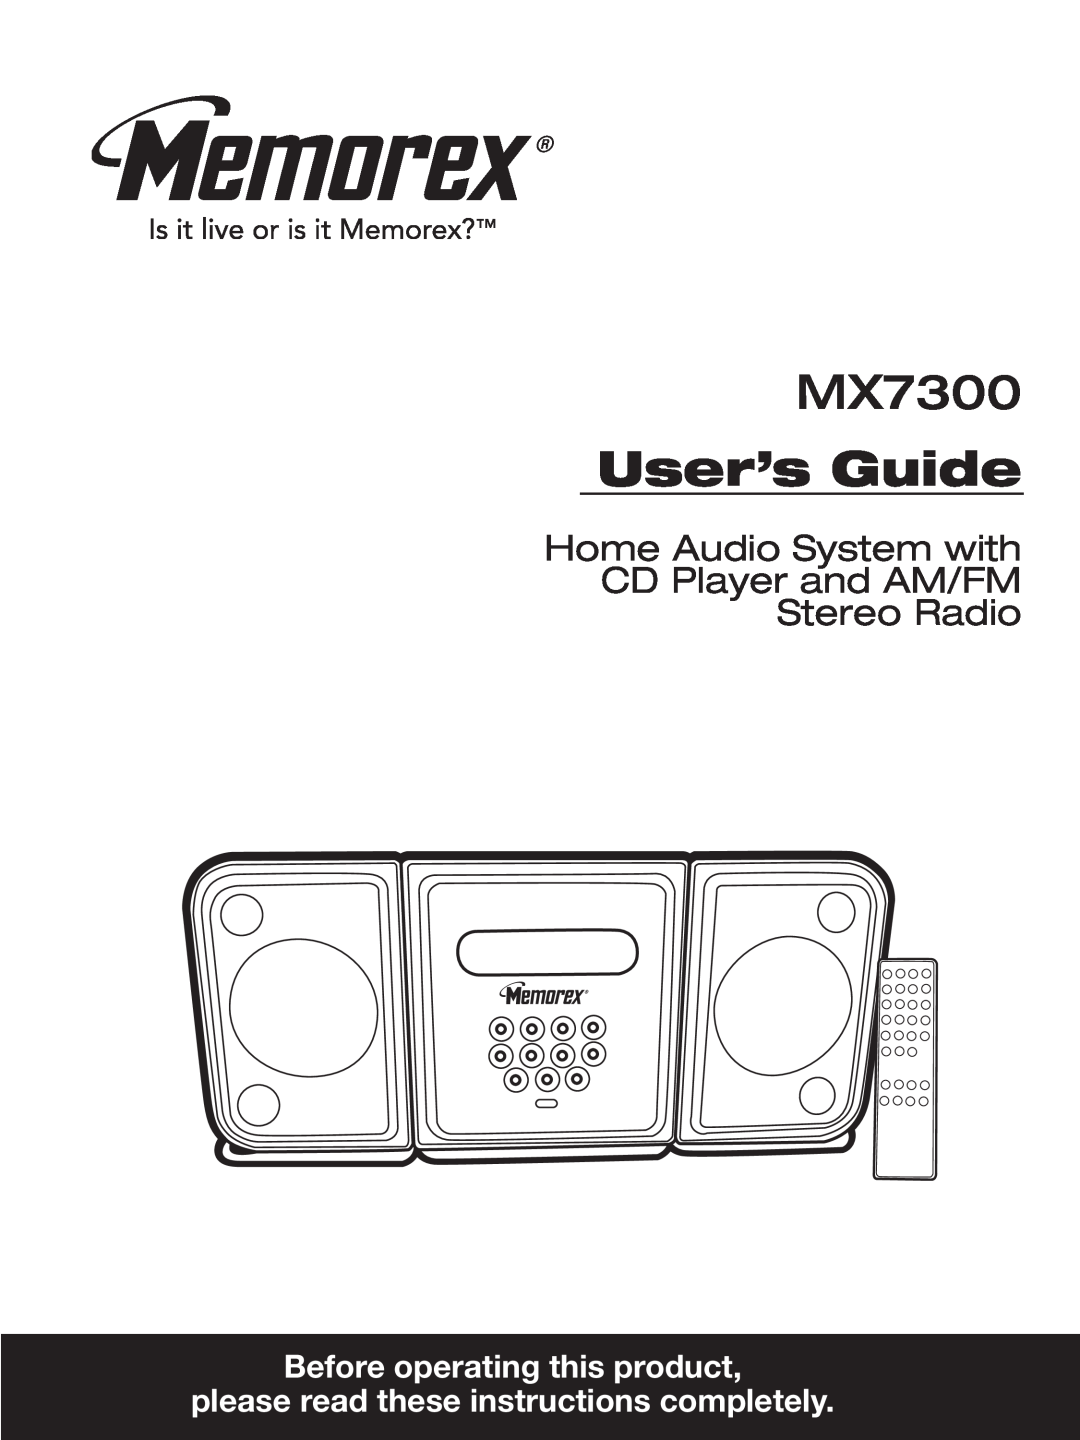 Memorex MX7300 manual User’s Guide, Before operating this product, please read these instructions completely 